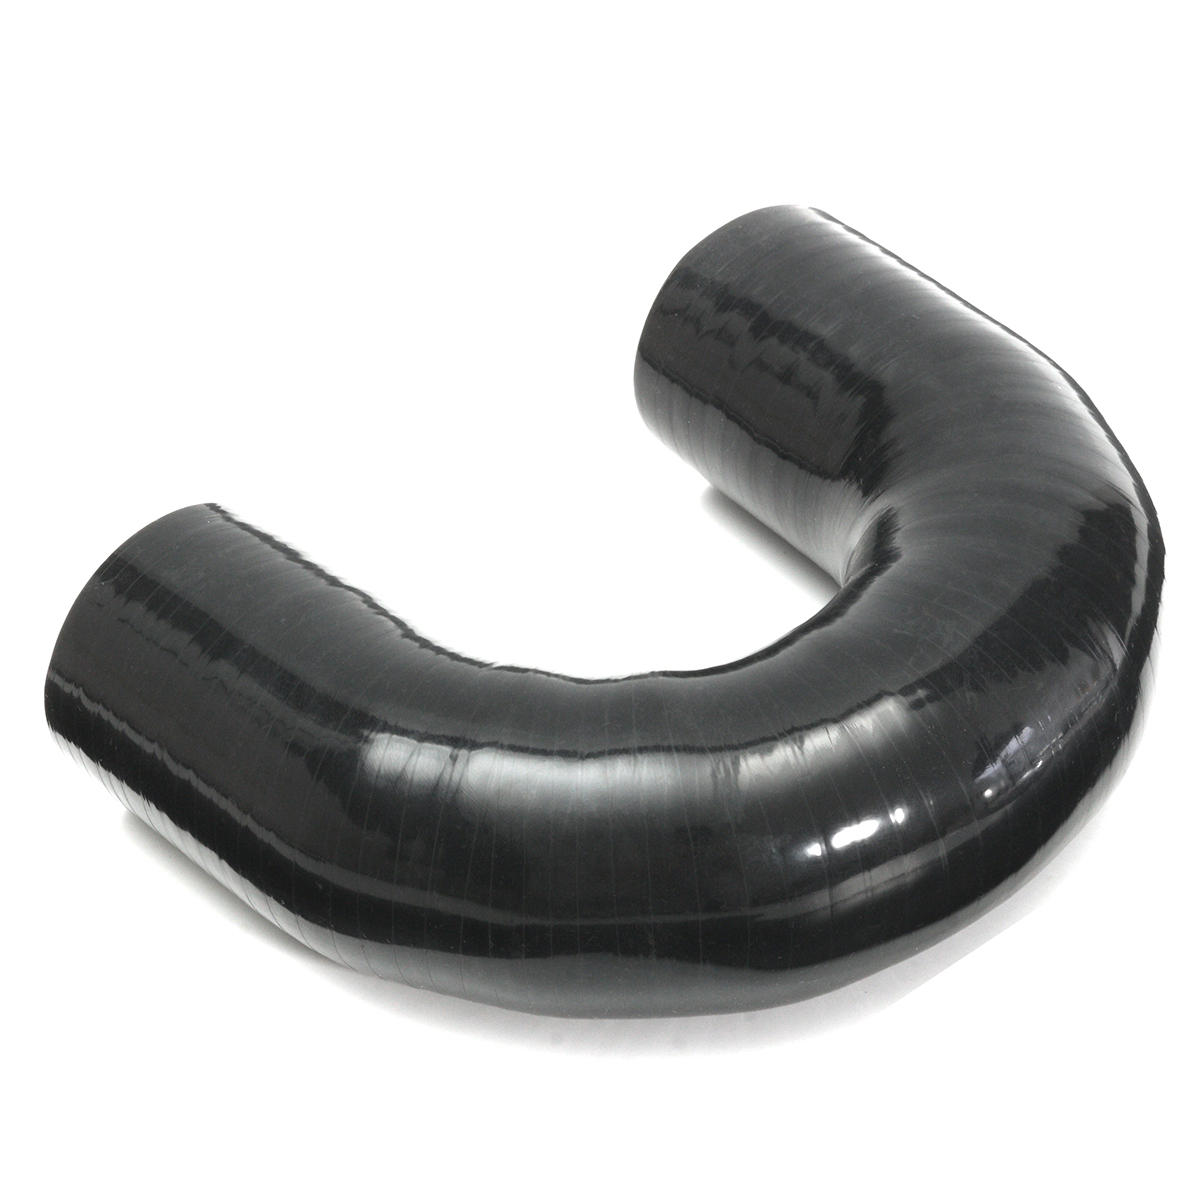 Multi size 180 Degree Car Turbo Black Silicone Hose Intercooler Boost Hose Pipe Elbows Bends